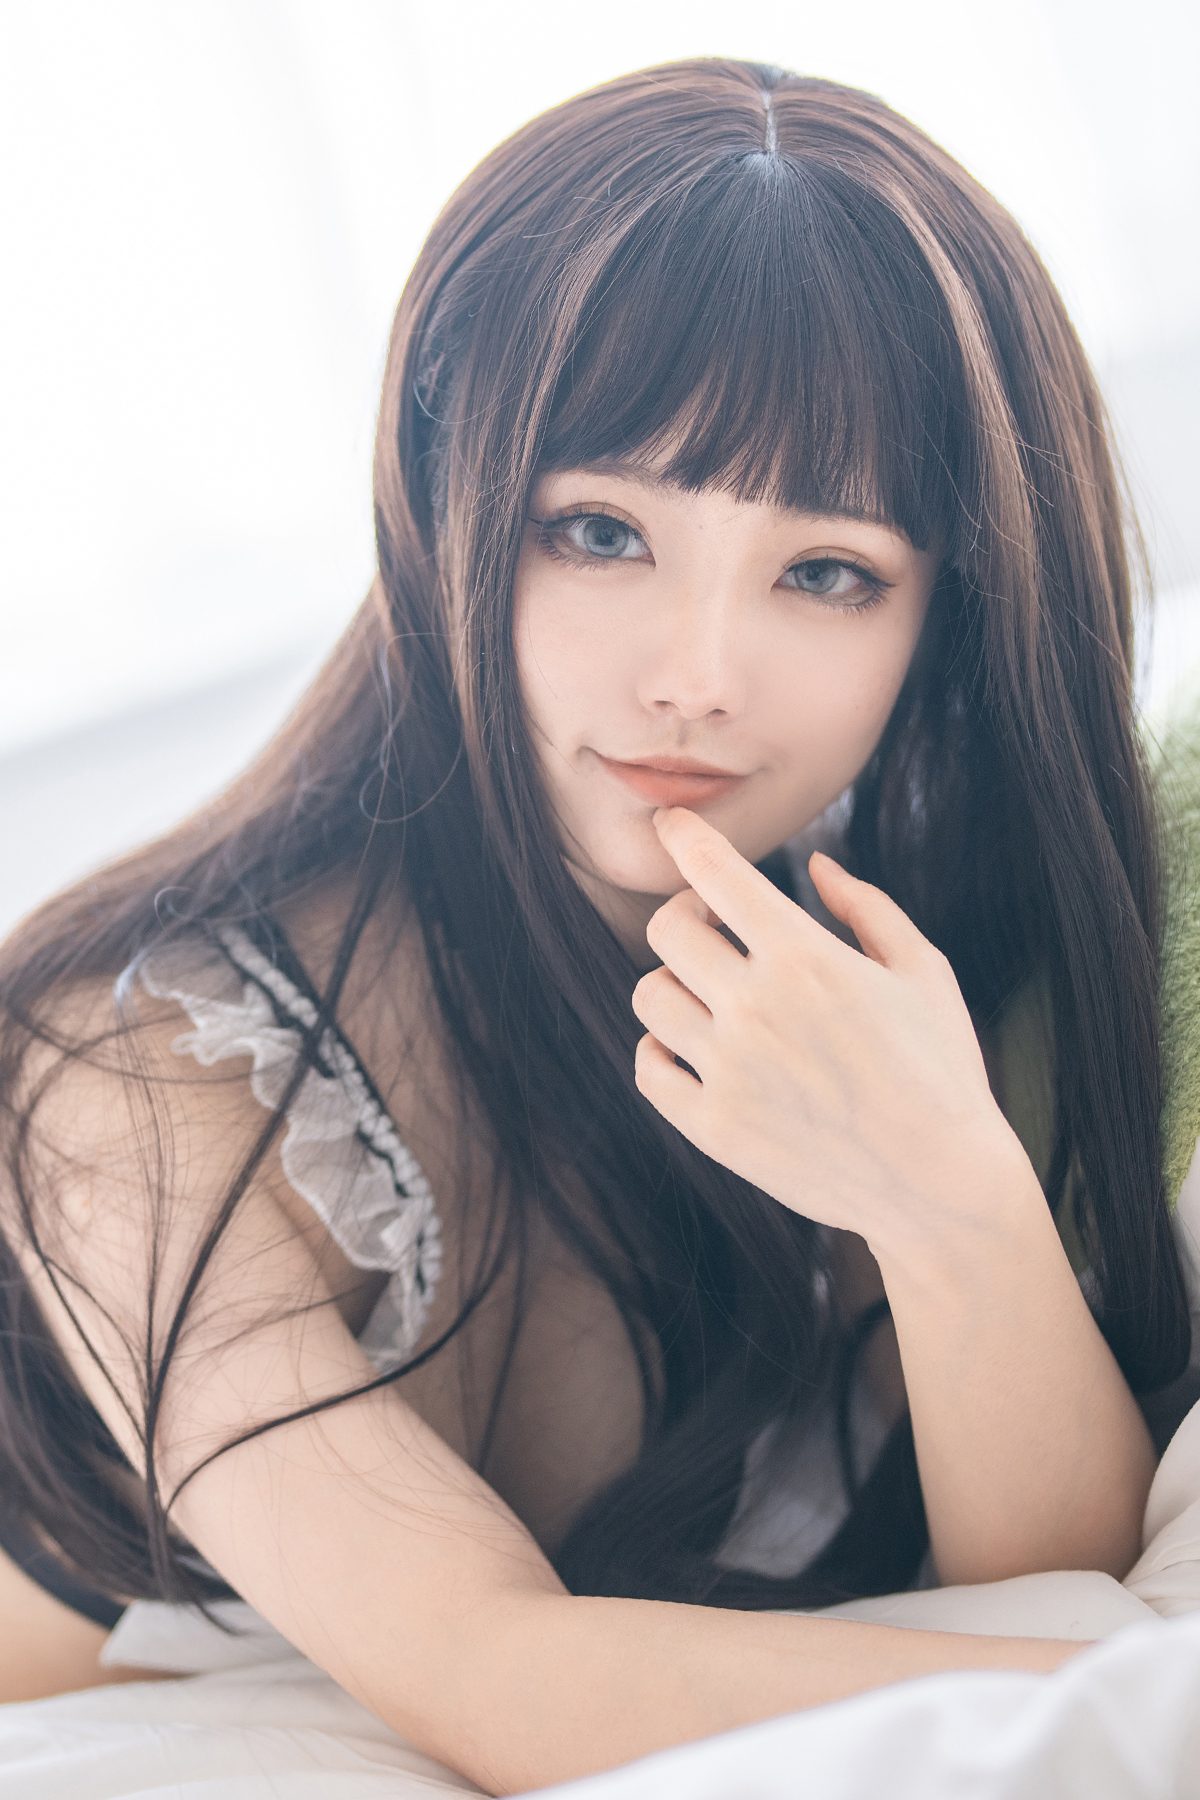 View - Coser@桃良阿宅 - 午睡 - 